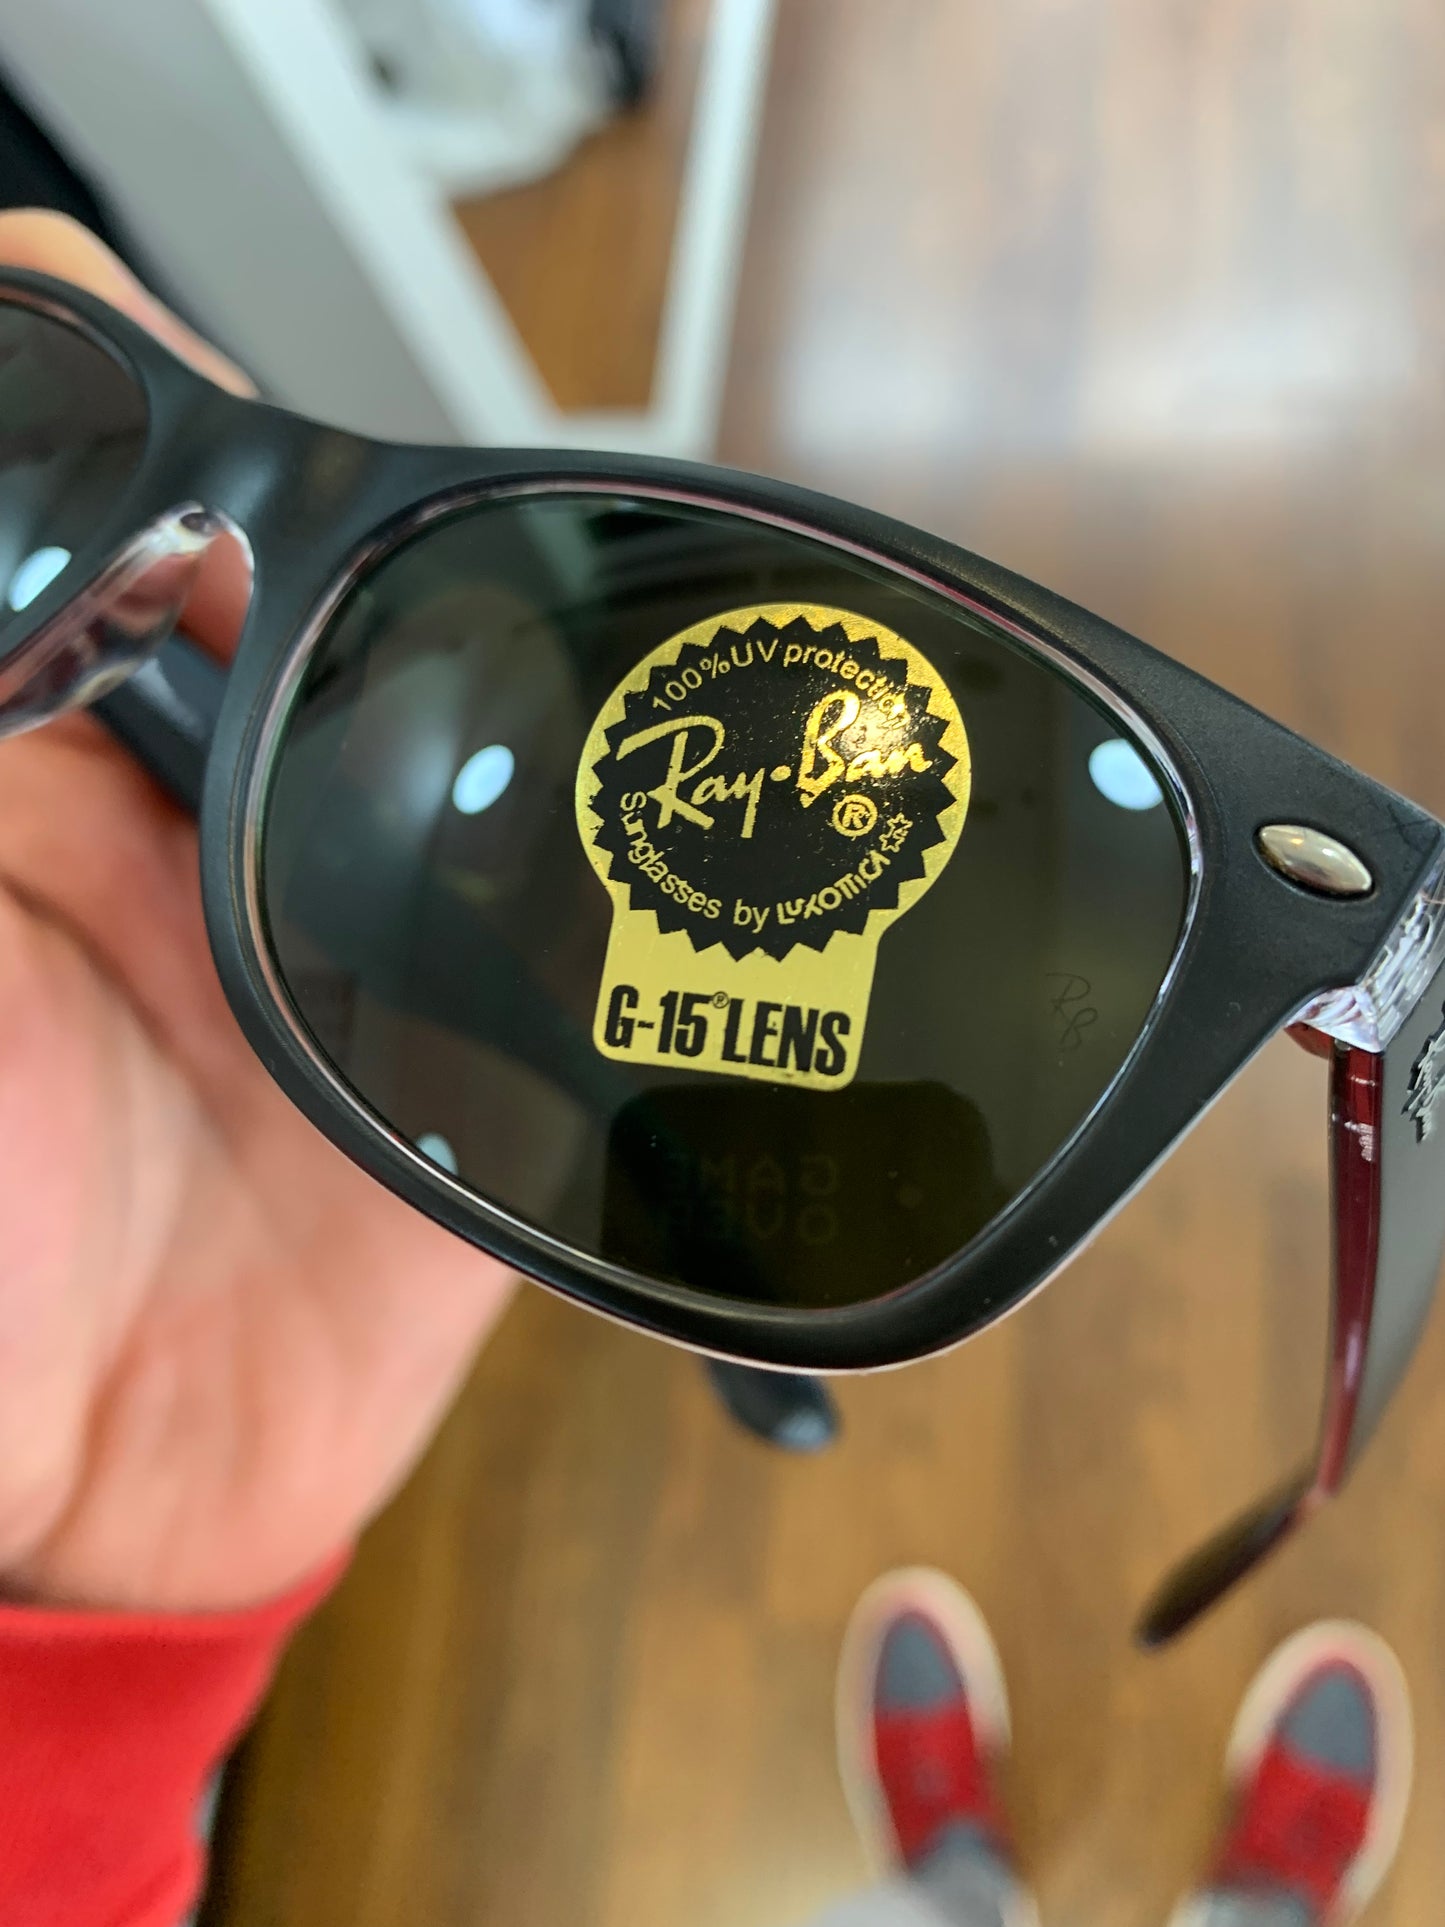 Ray Ban second Life